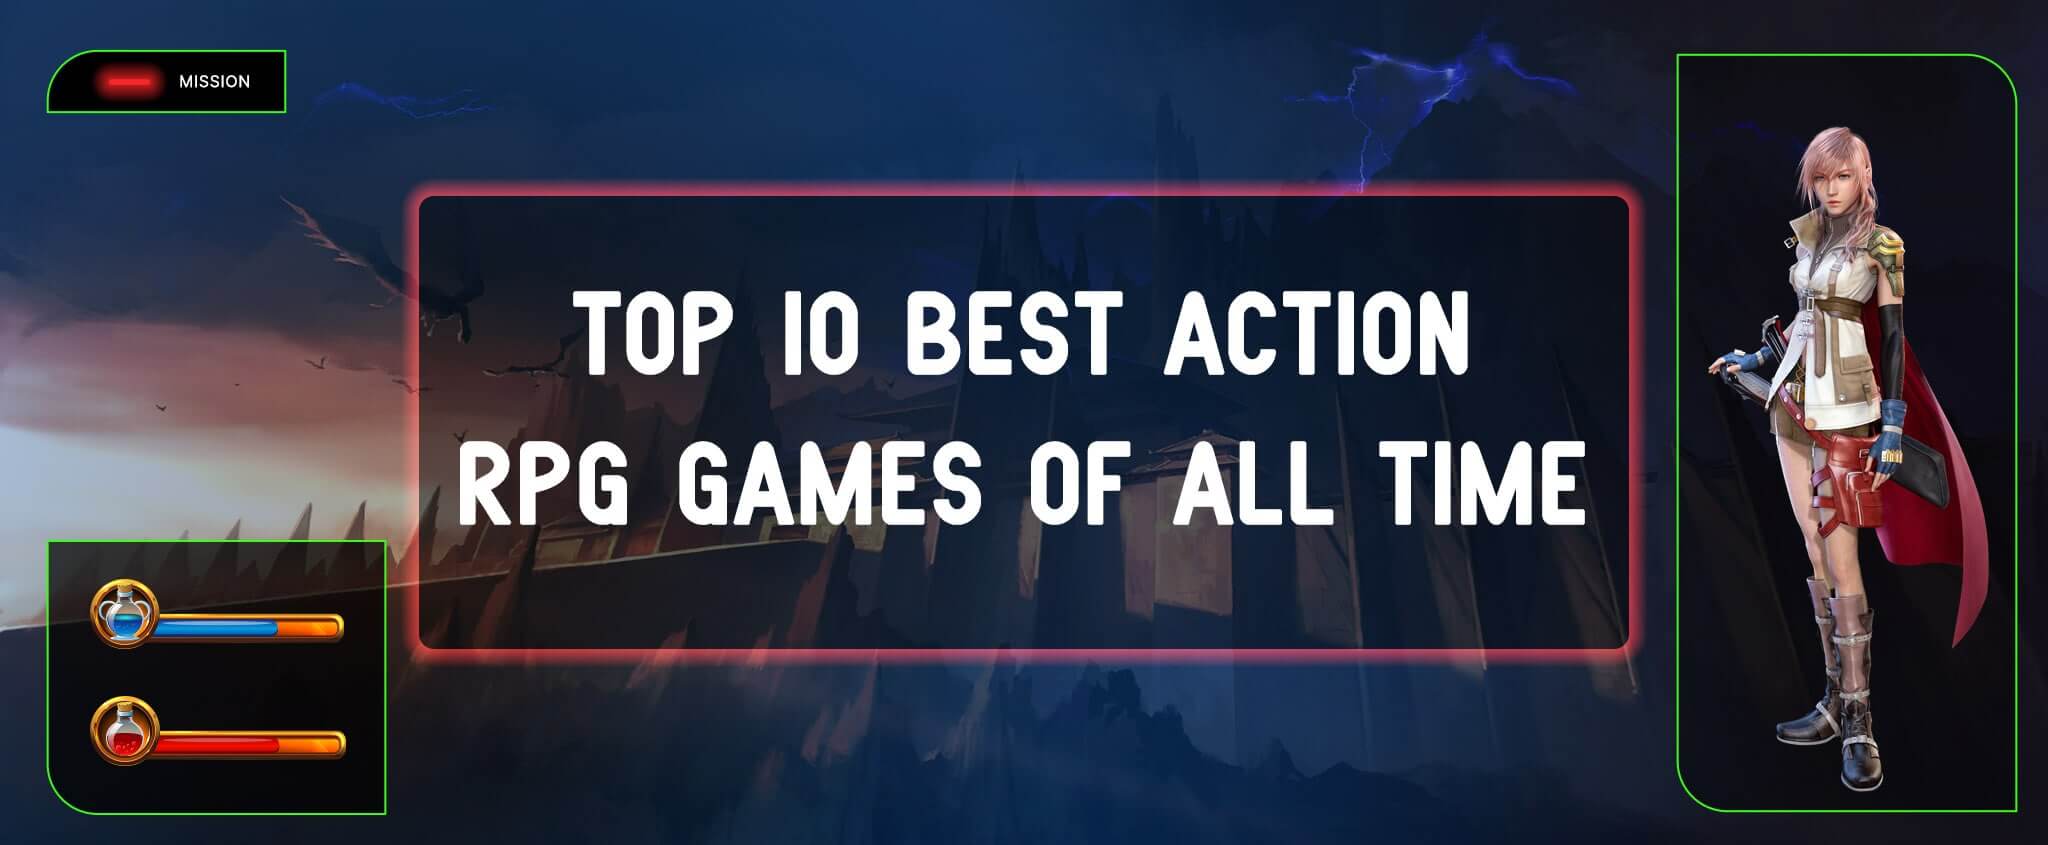 Top 10 Best Action RPG Games of All Time - CCC International